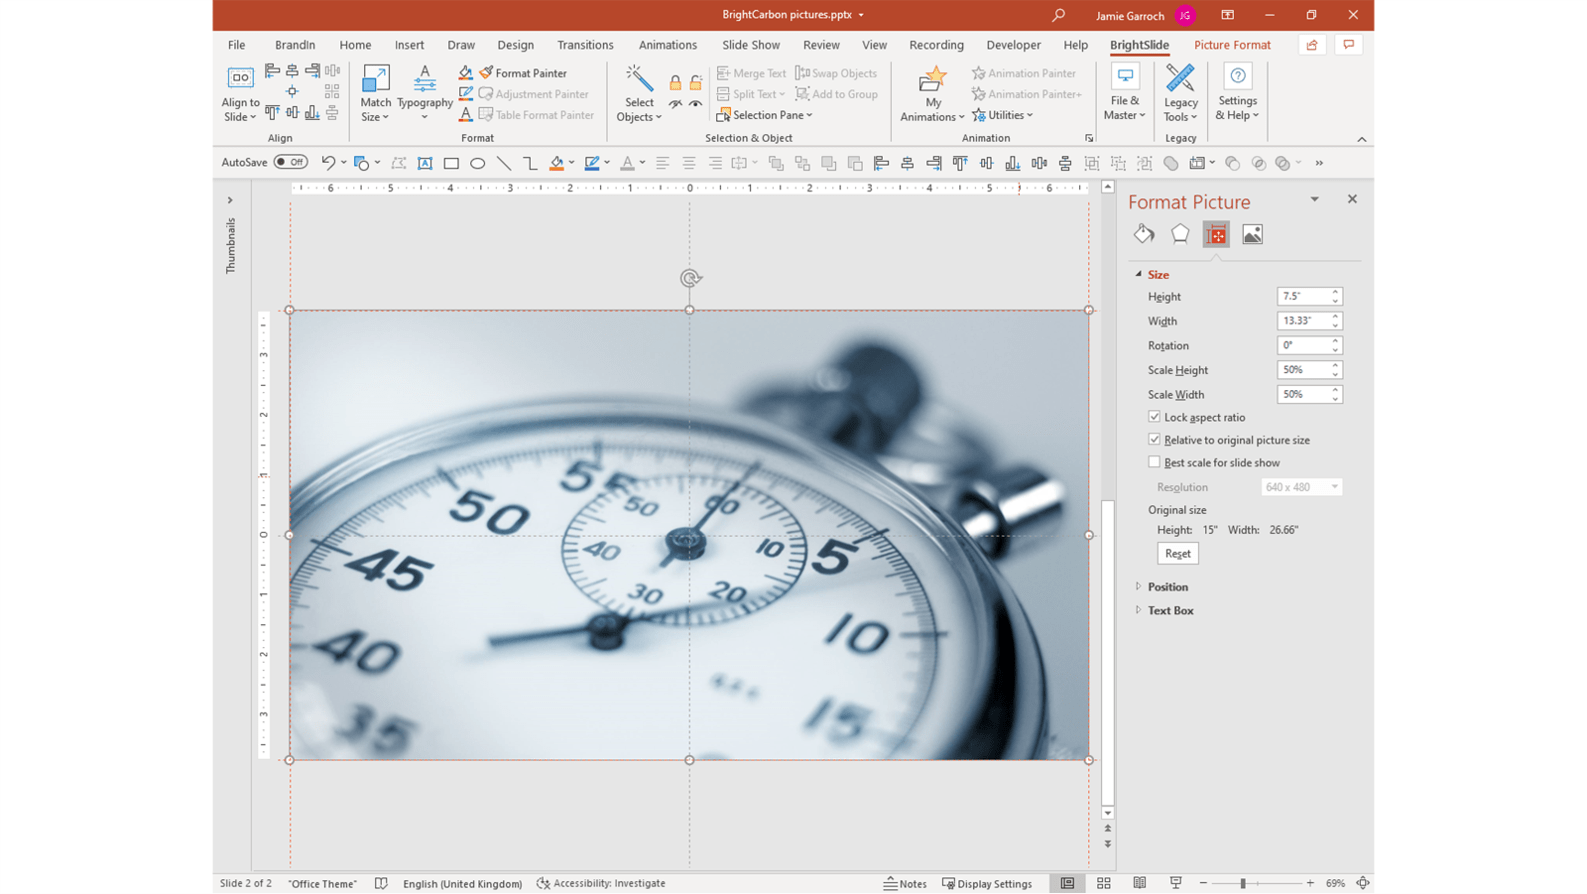 screenshot of HD1080p picture inserted into PowerPoint at 72dpi